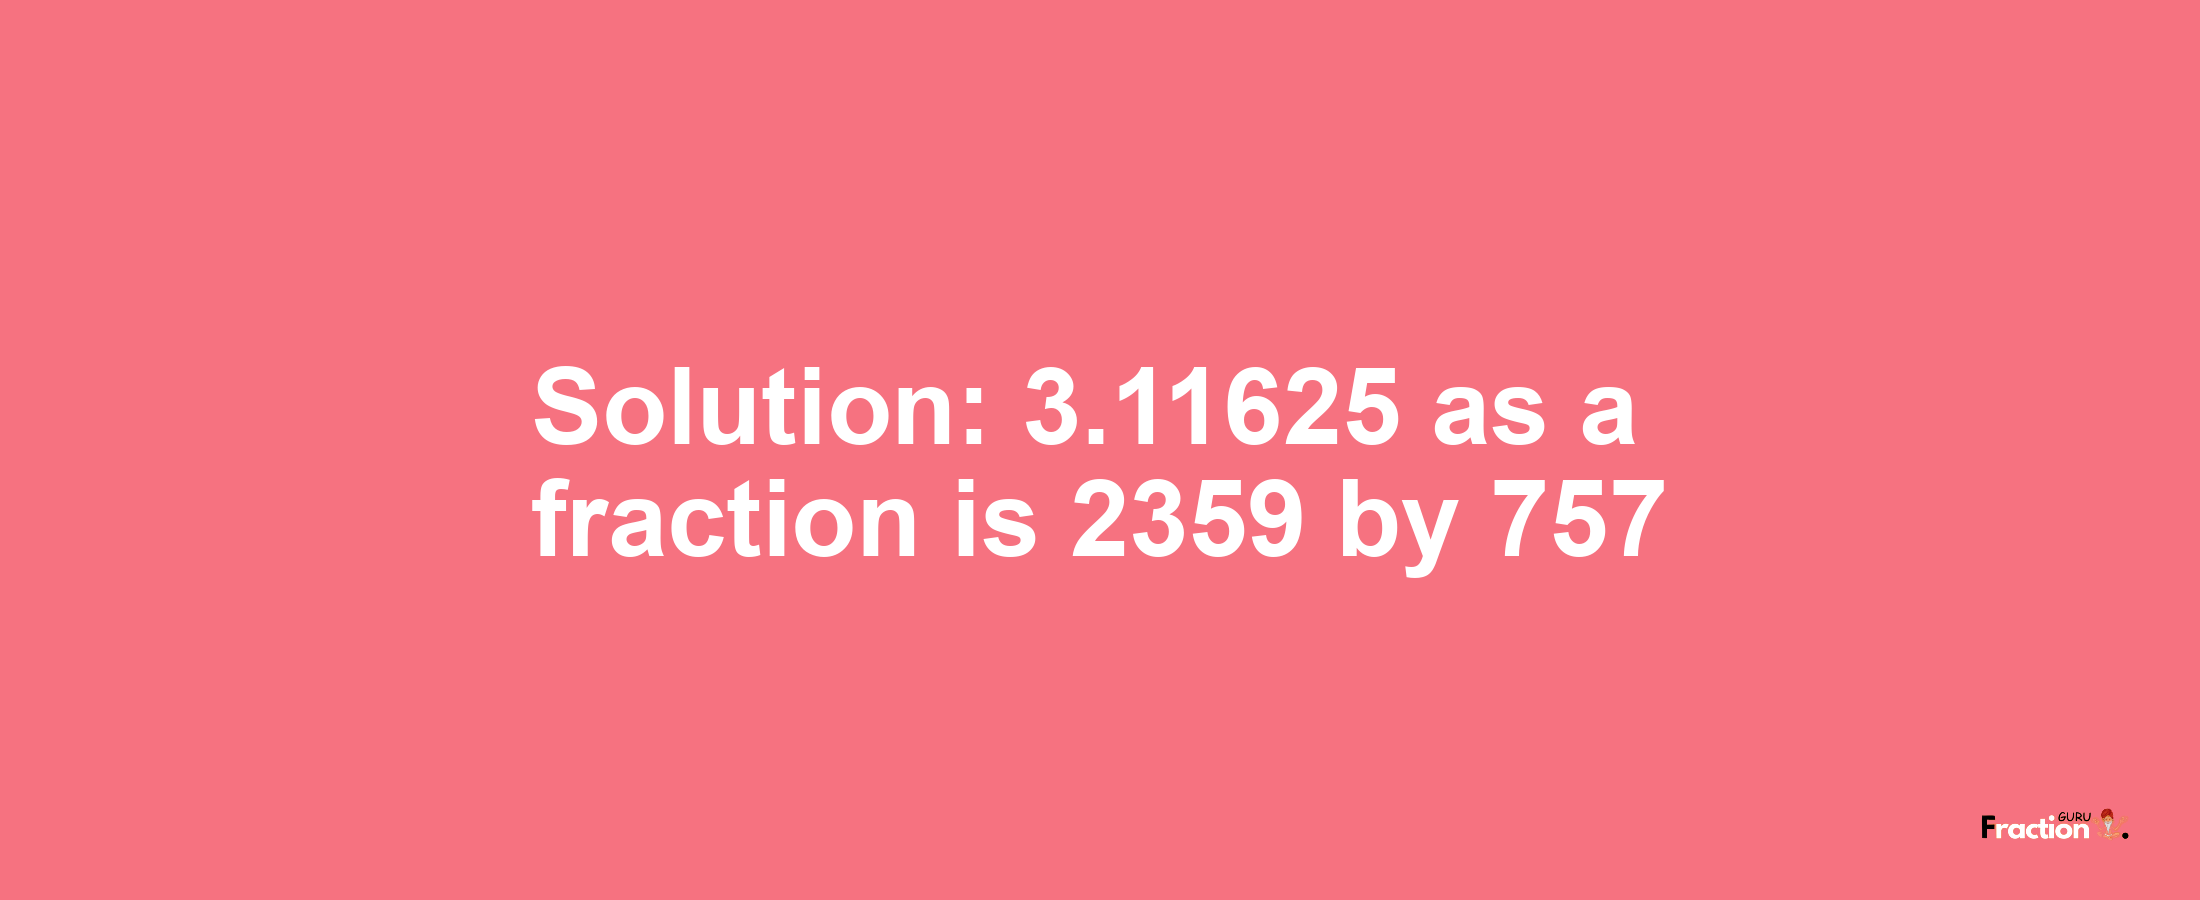 Solution:3.11625 as a fraction is 2359/757